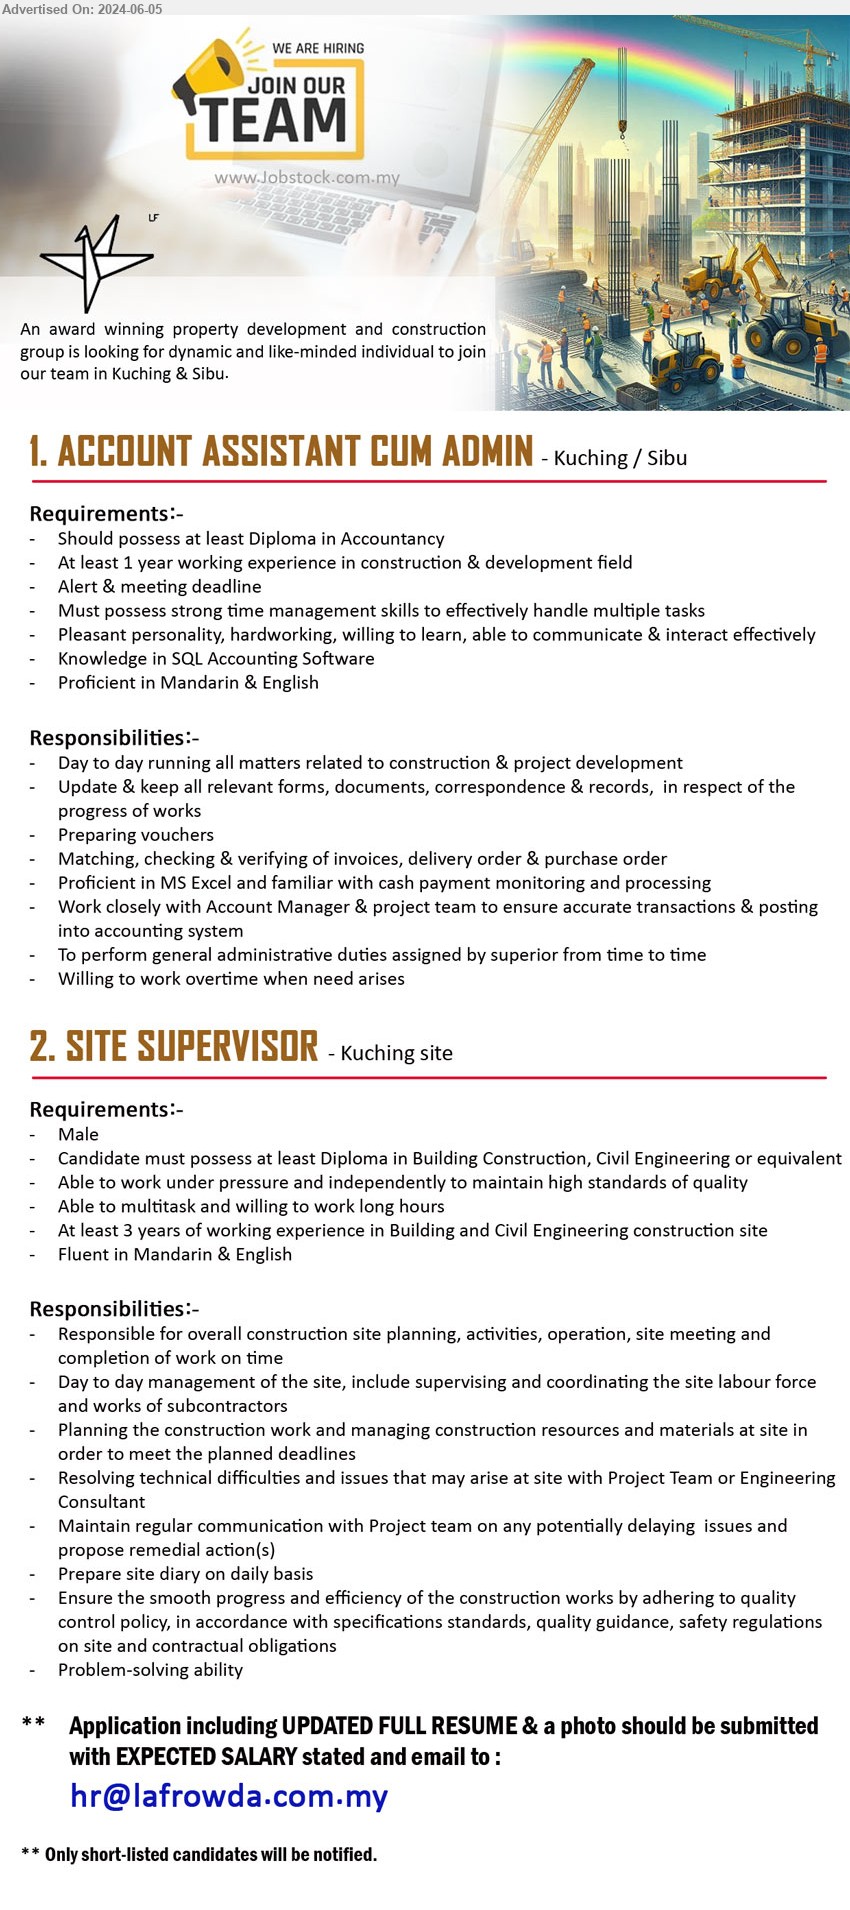 ADVERTISER (Property Development and Construction group) - 1. ACCOUNT ASSISTANT CUM ADMIN (Kuching, Sibu), Diploma in Accountancy, At least 1 year working experience in construction & development field,...
2. SITE SUPERVISOR (Kuching), Diploma in Building Construction, Civil Engineering,...
Email resume to ...
